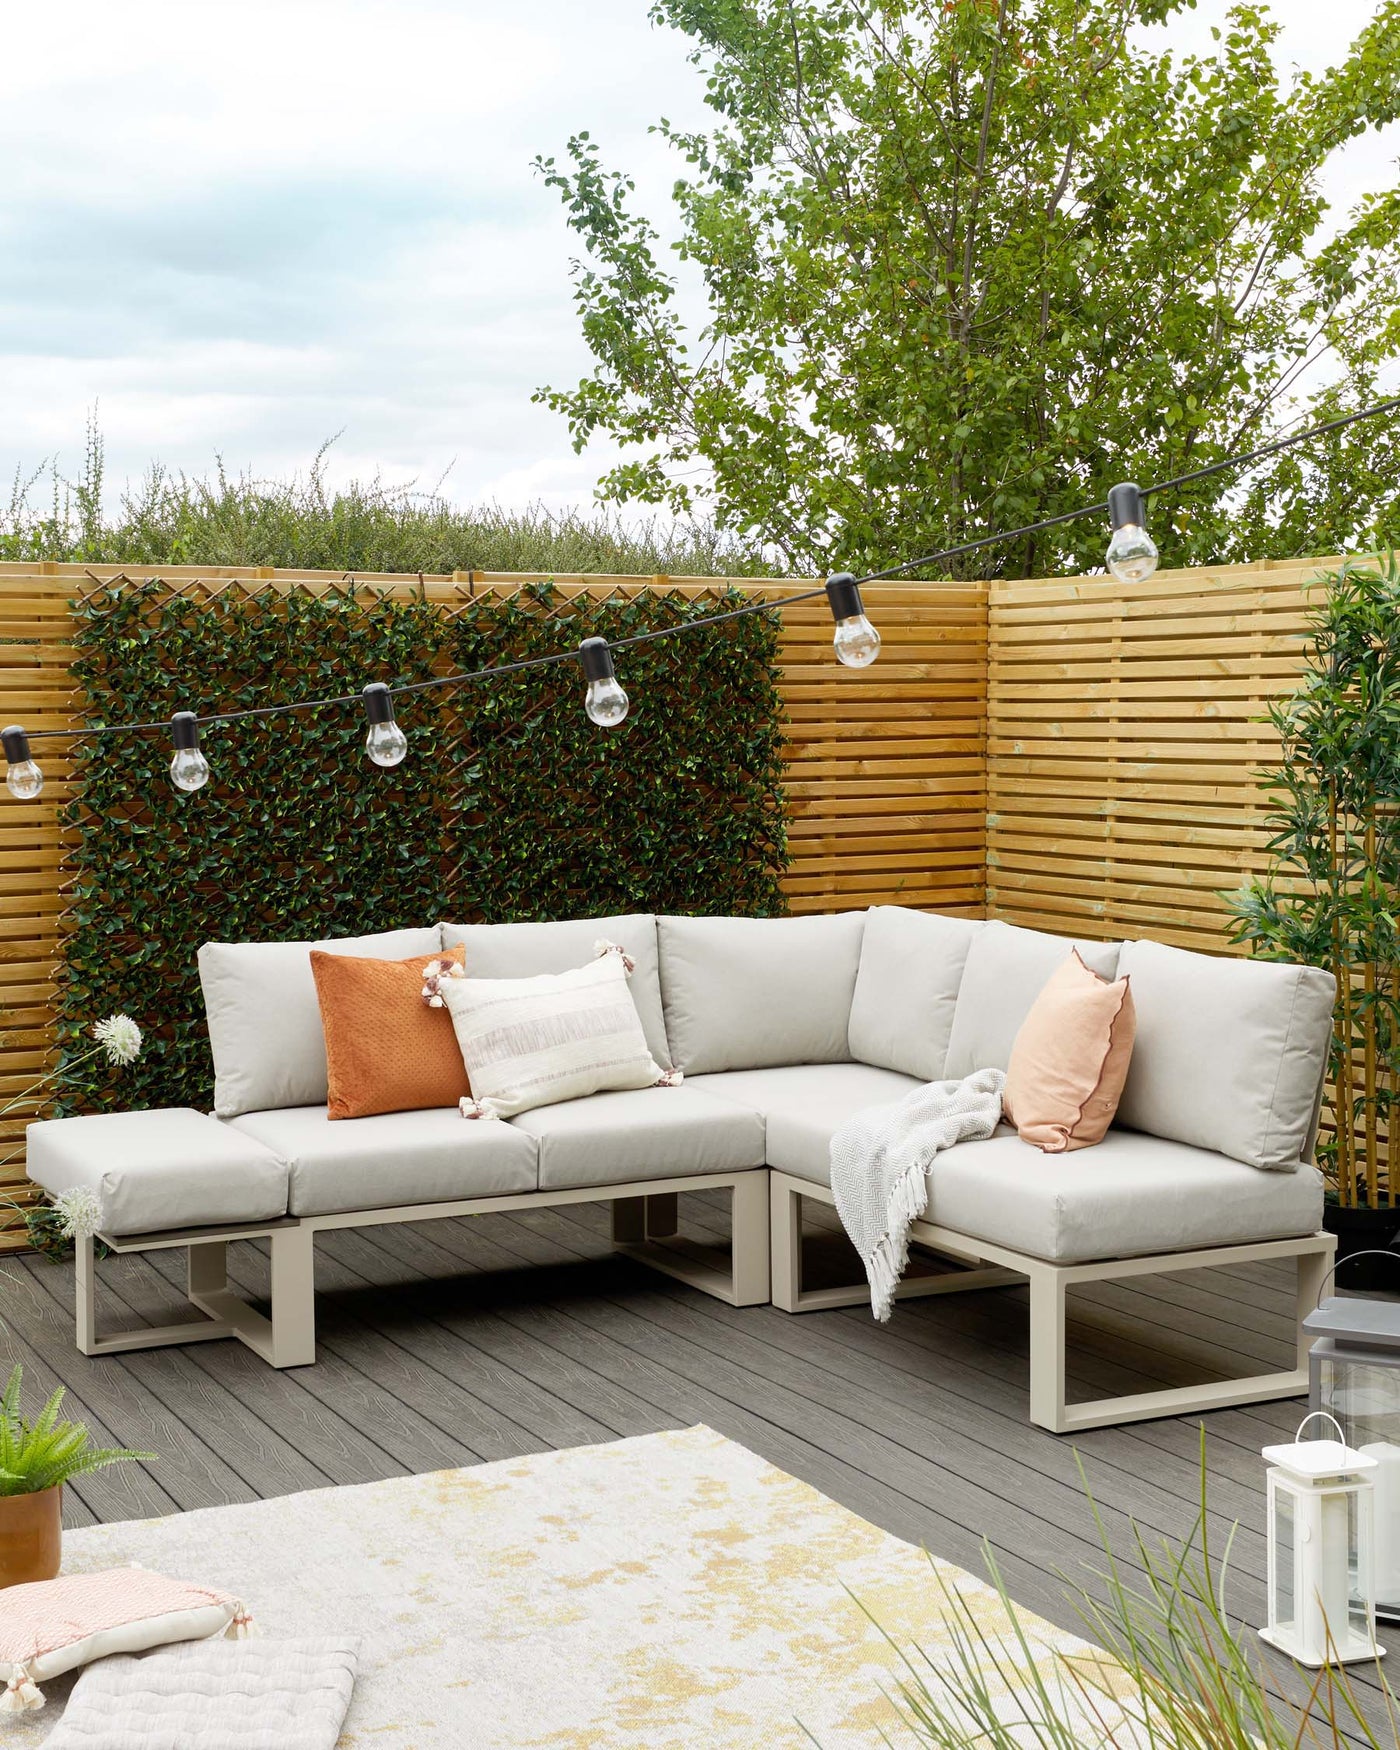 L-shaped modular outdoor sectional sofa with light grey cushions on a white aluminium frame, paired with decorative pillows in shades of orange and white with tassel accents, complemented by a cosy off-white throw blanket. A light grey and yellow patterned outdoor area rug rests underneath, while a white lantern sits nearby to complete the inviting patio arrangement.